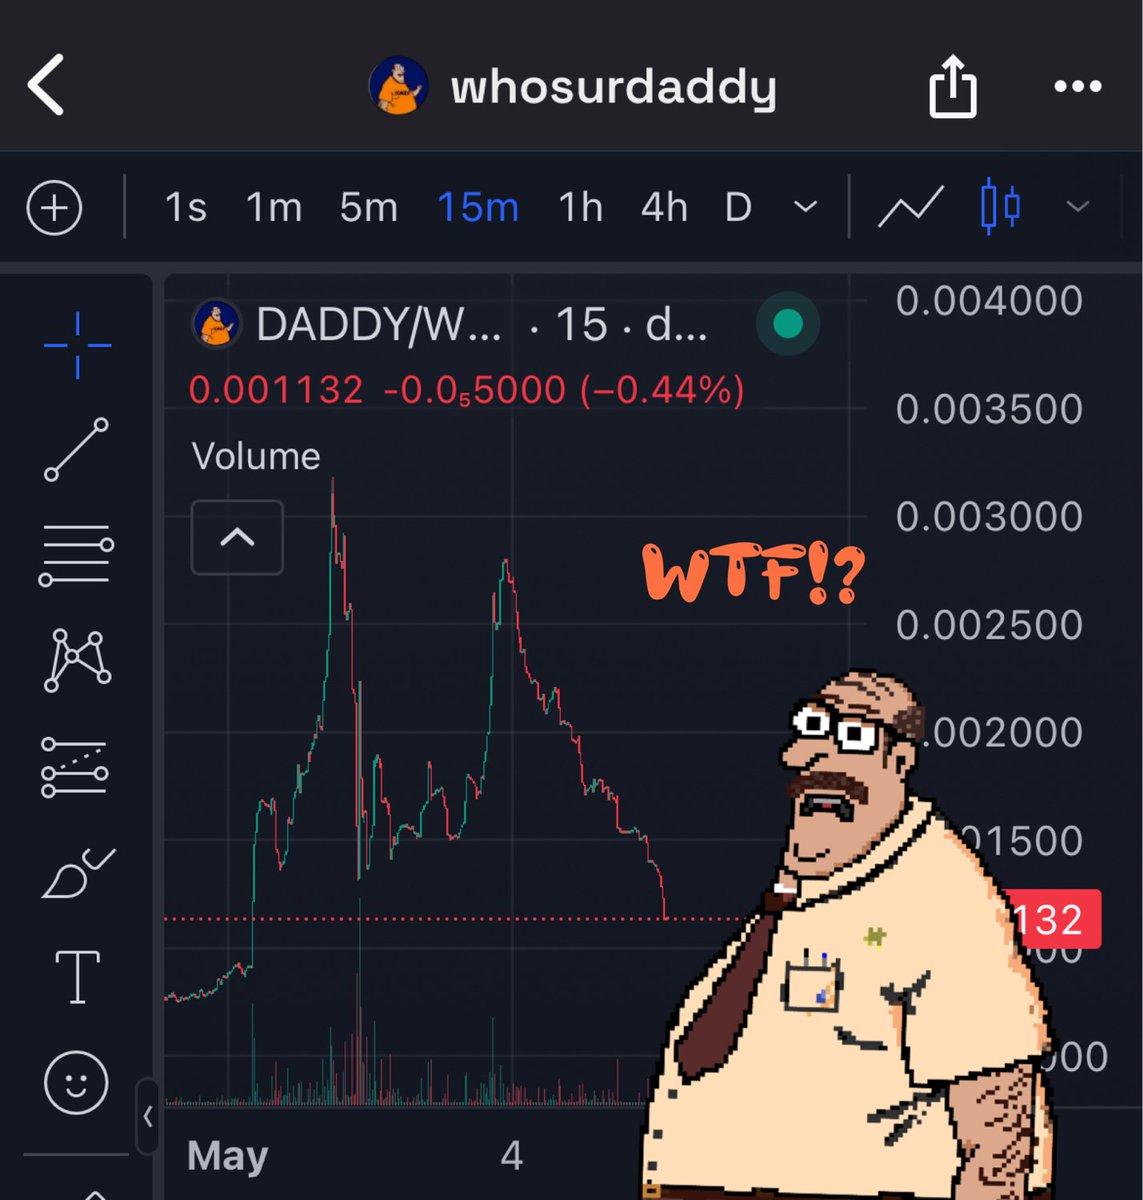 $DADDY is not mad 😡. He's just disappointed. 

#BuyTheDip #cronos #crofam